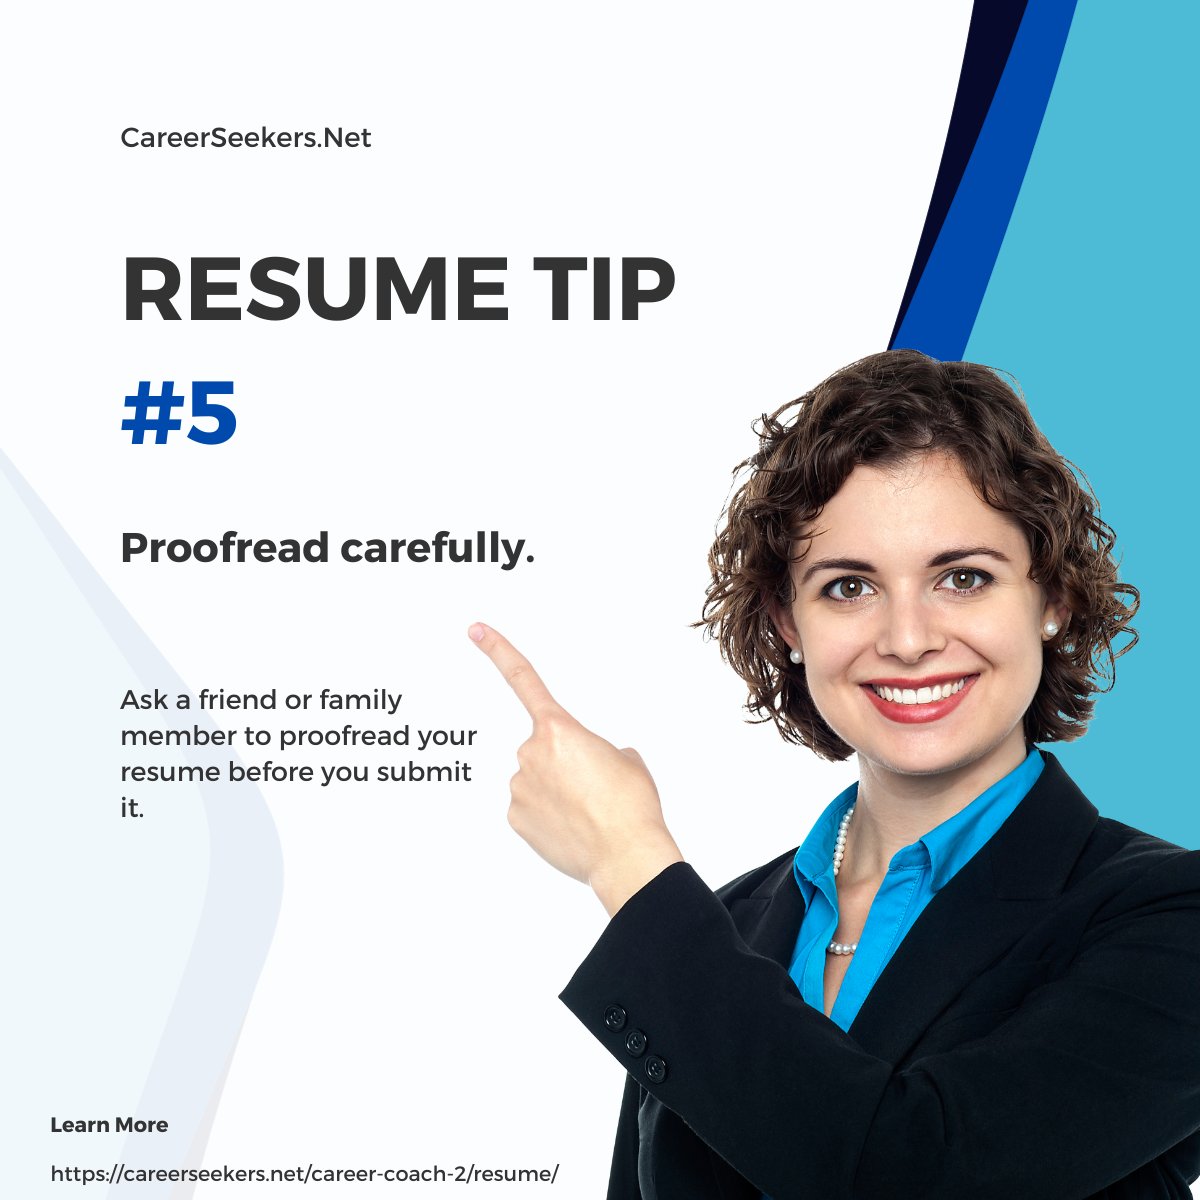 For more tips on how to write your resume to get job interviews 👉👉 careerseekers.net/career-coach-2…
#ResumeTips #JobHunt #CareerAdvice